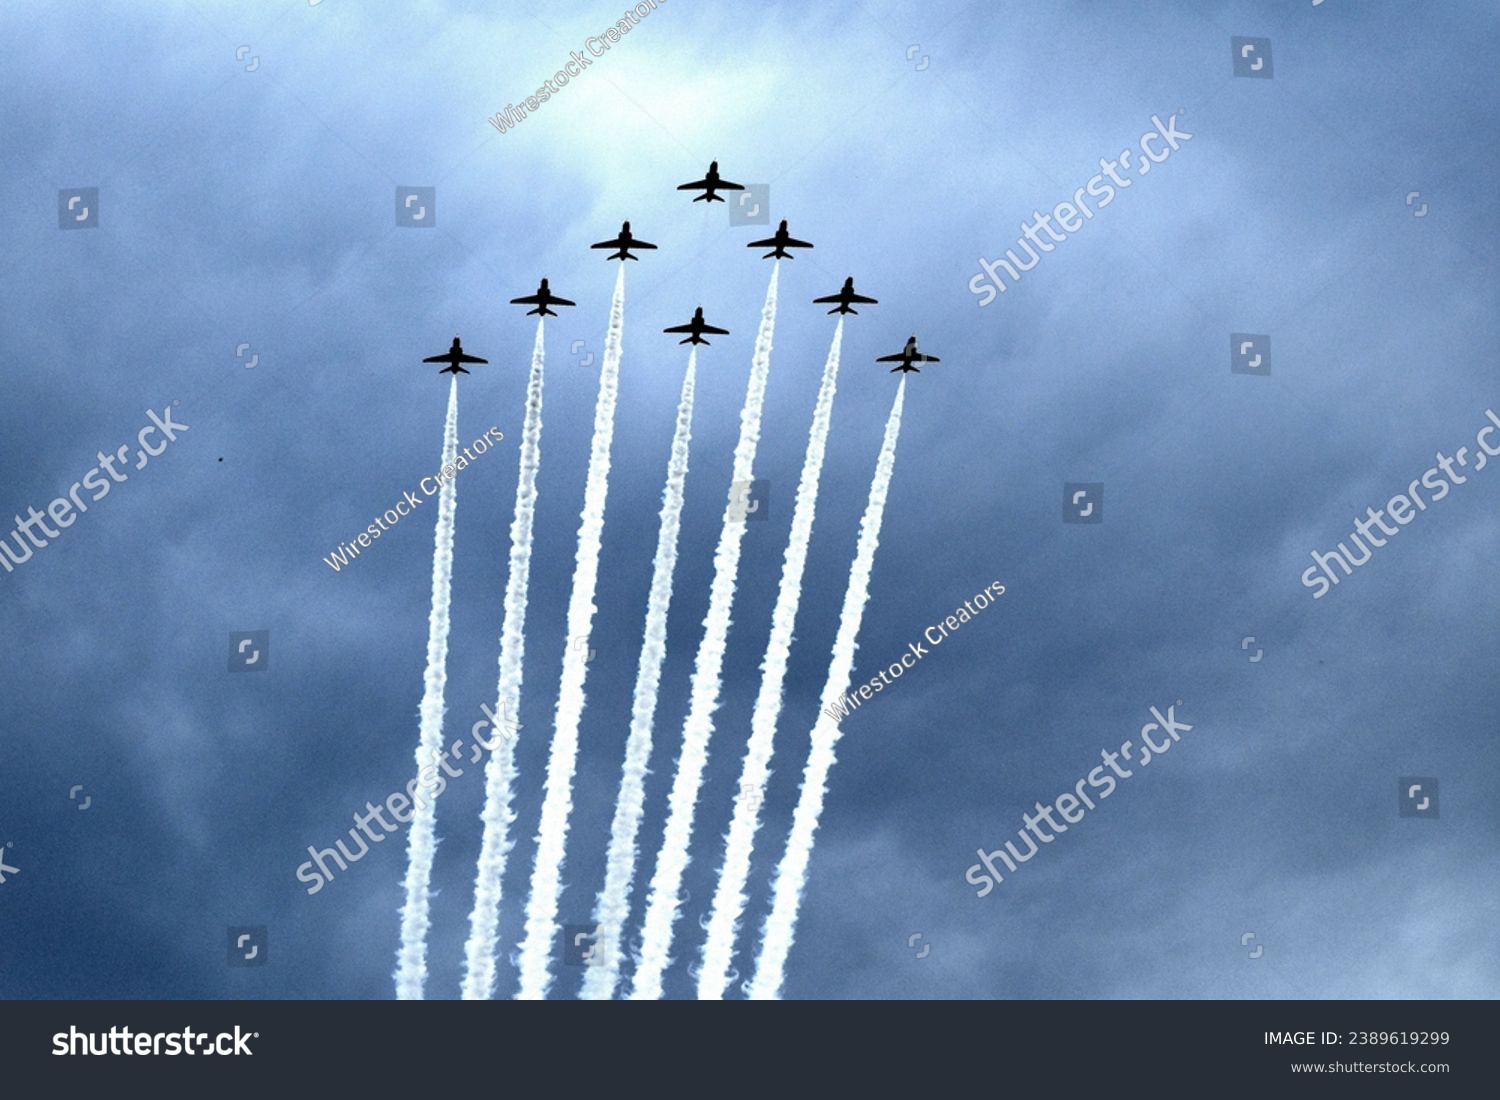 A picture of several airplanes in formation soaring through the sky, with white, billowing smoke trails trailing behind each one #2389619299